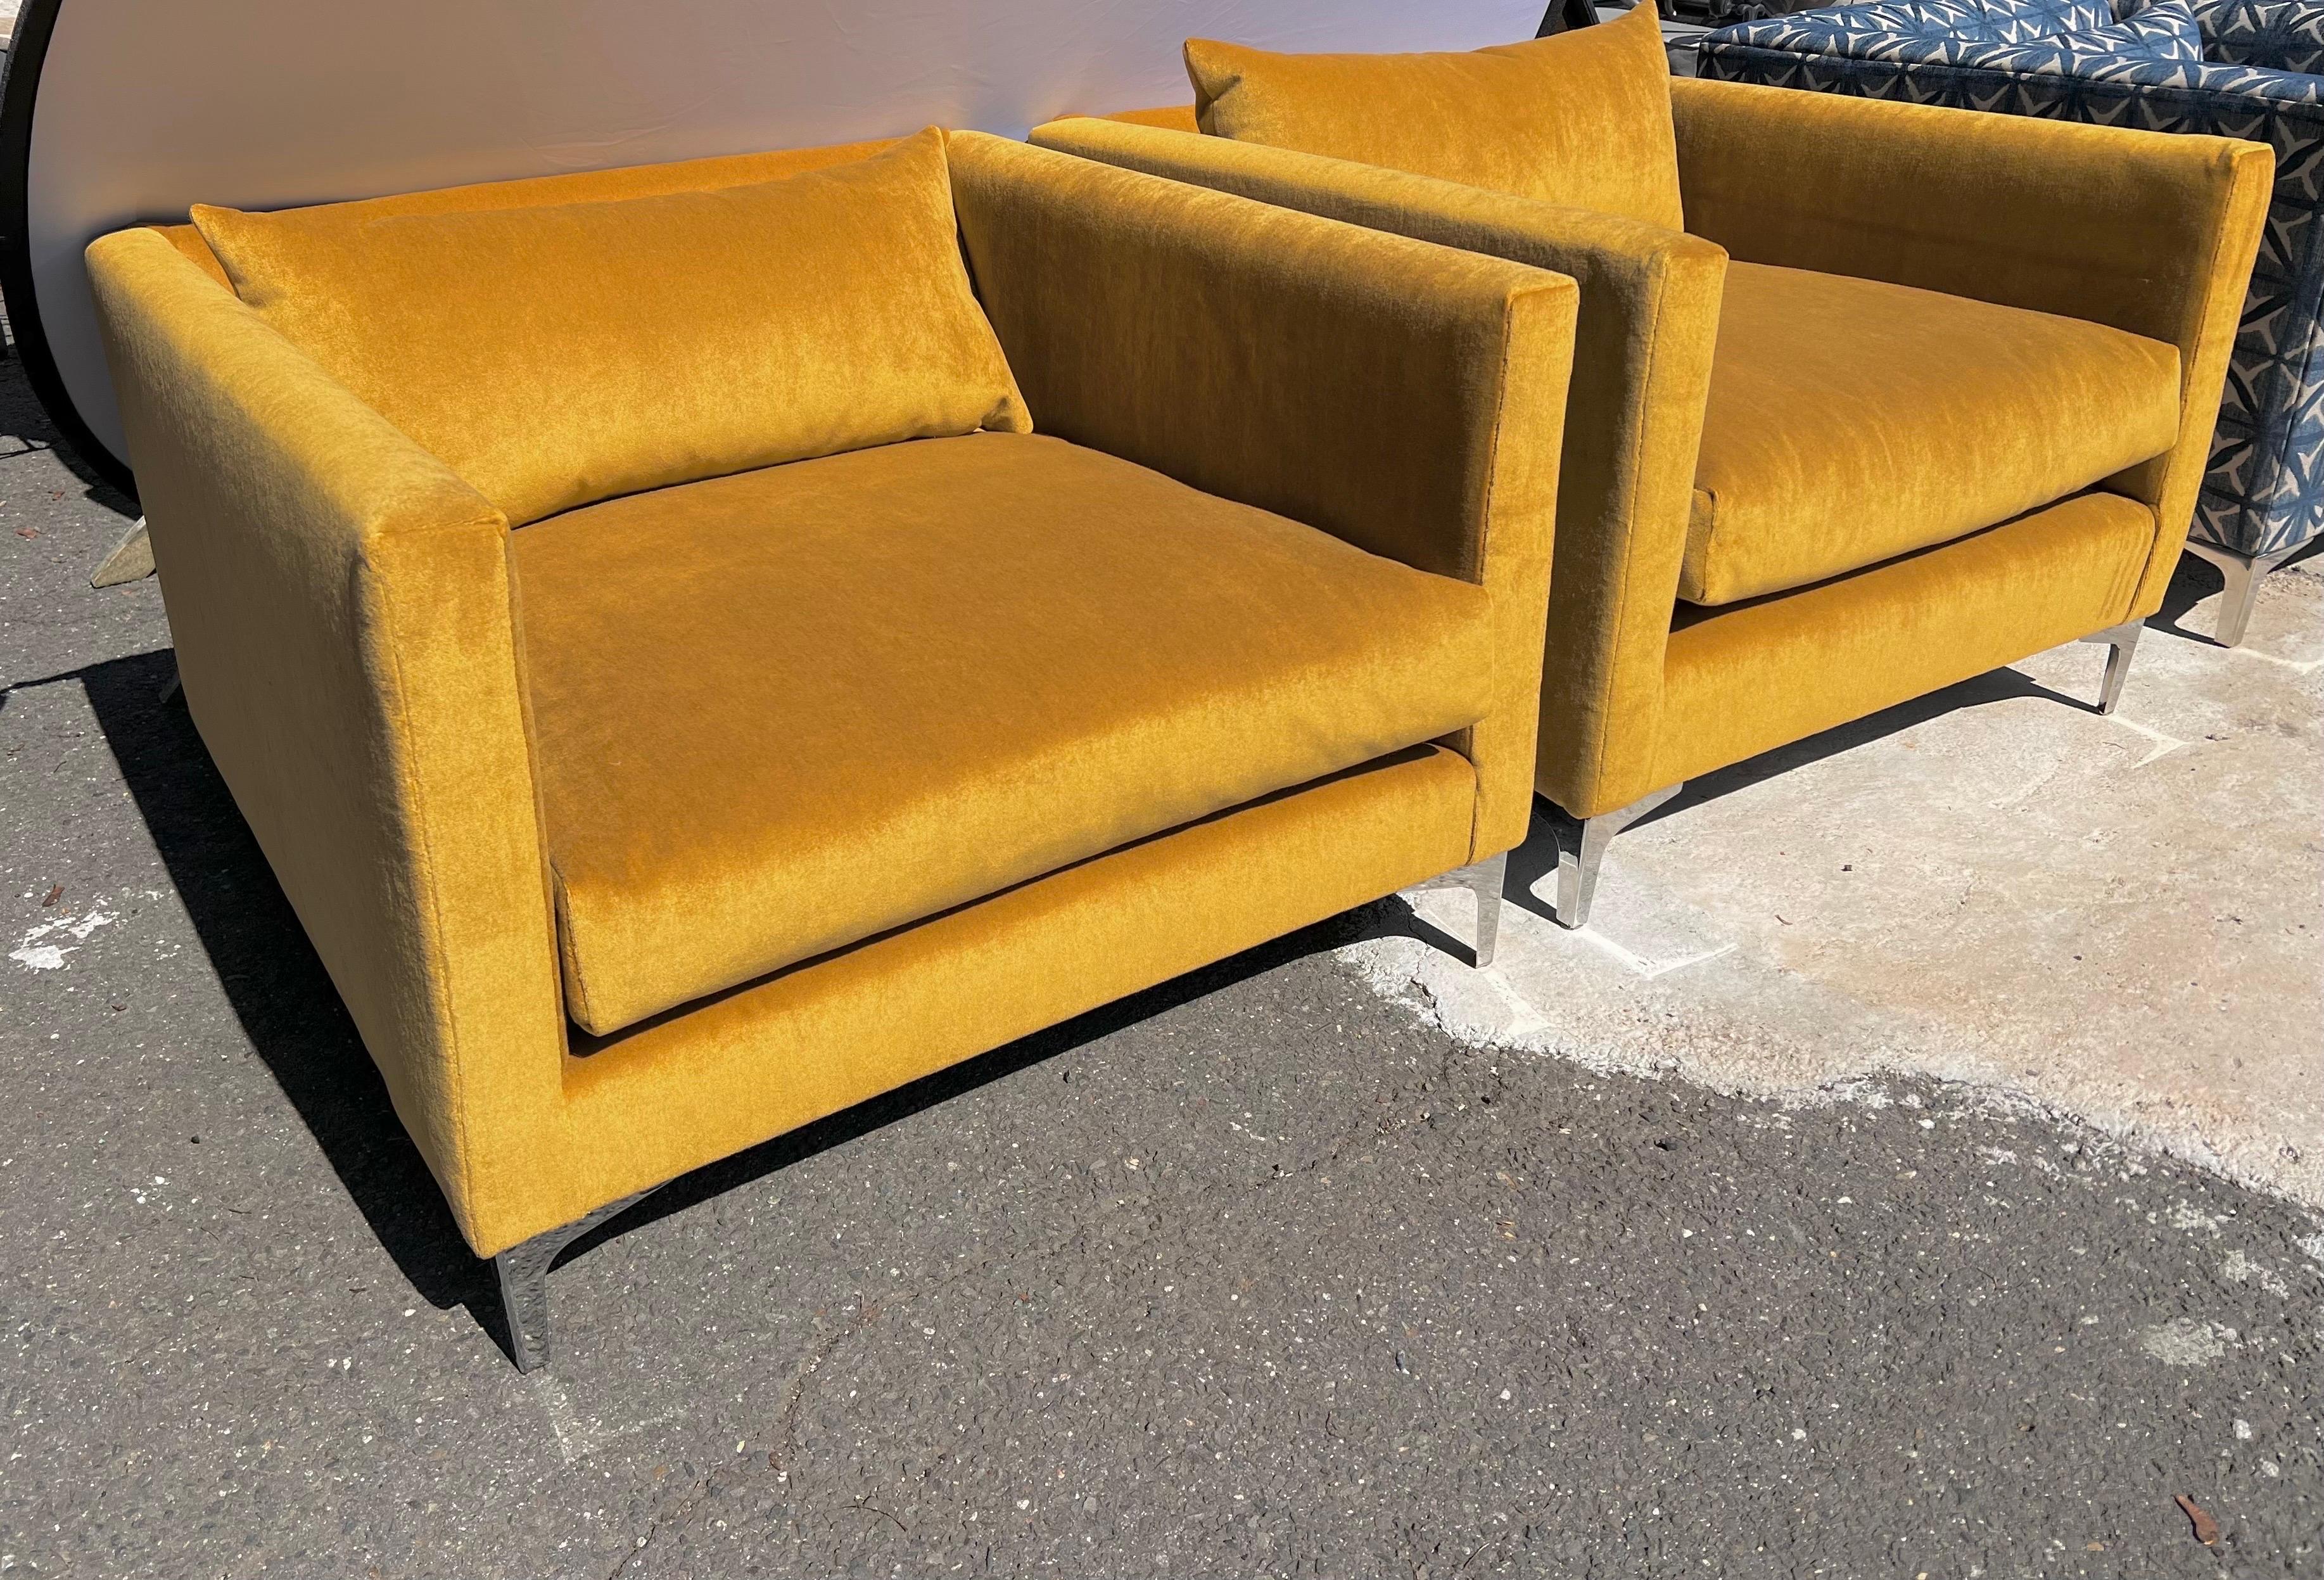 Pair of mid century style matching oversized cube chairs newly upholstered in a yellow gold mohair fabric supported on a chrome base. 